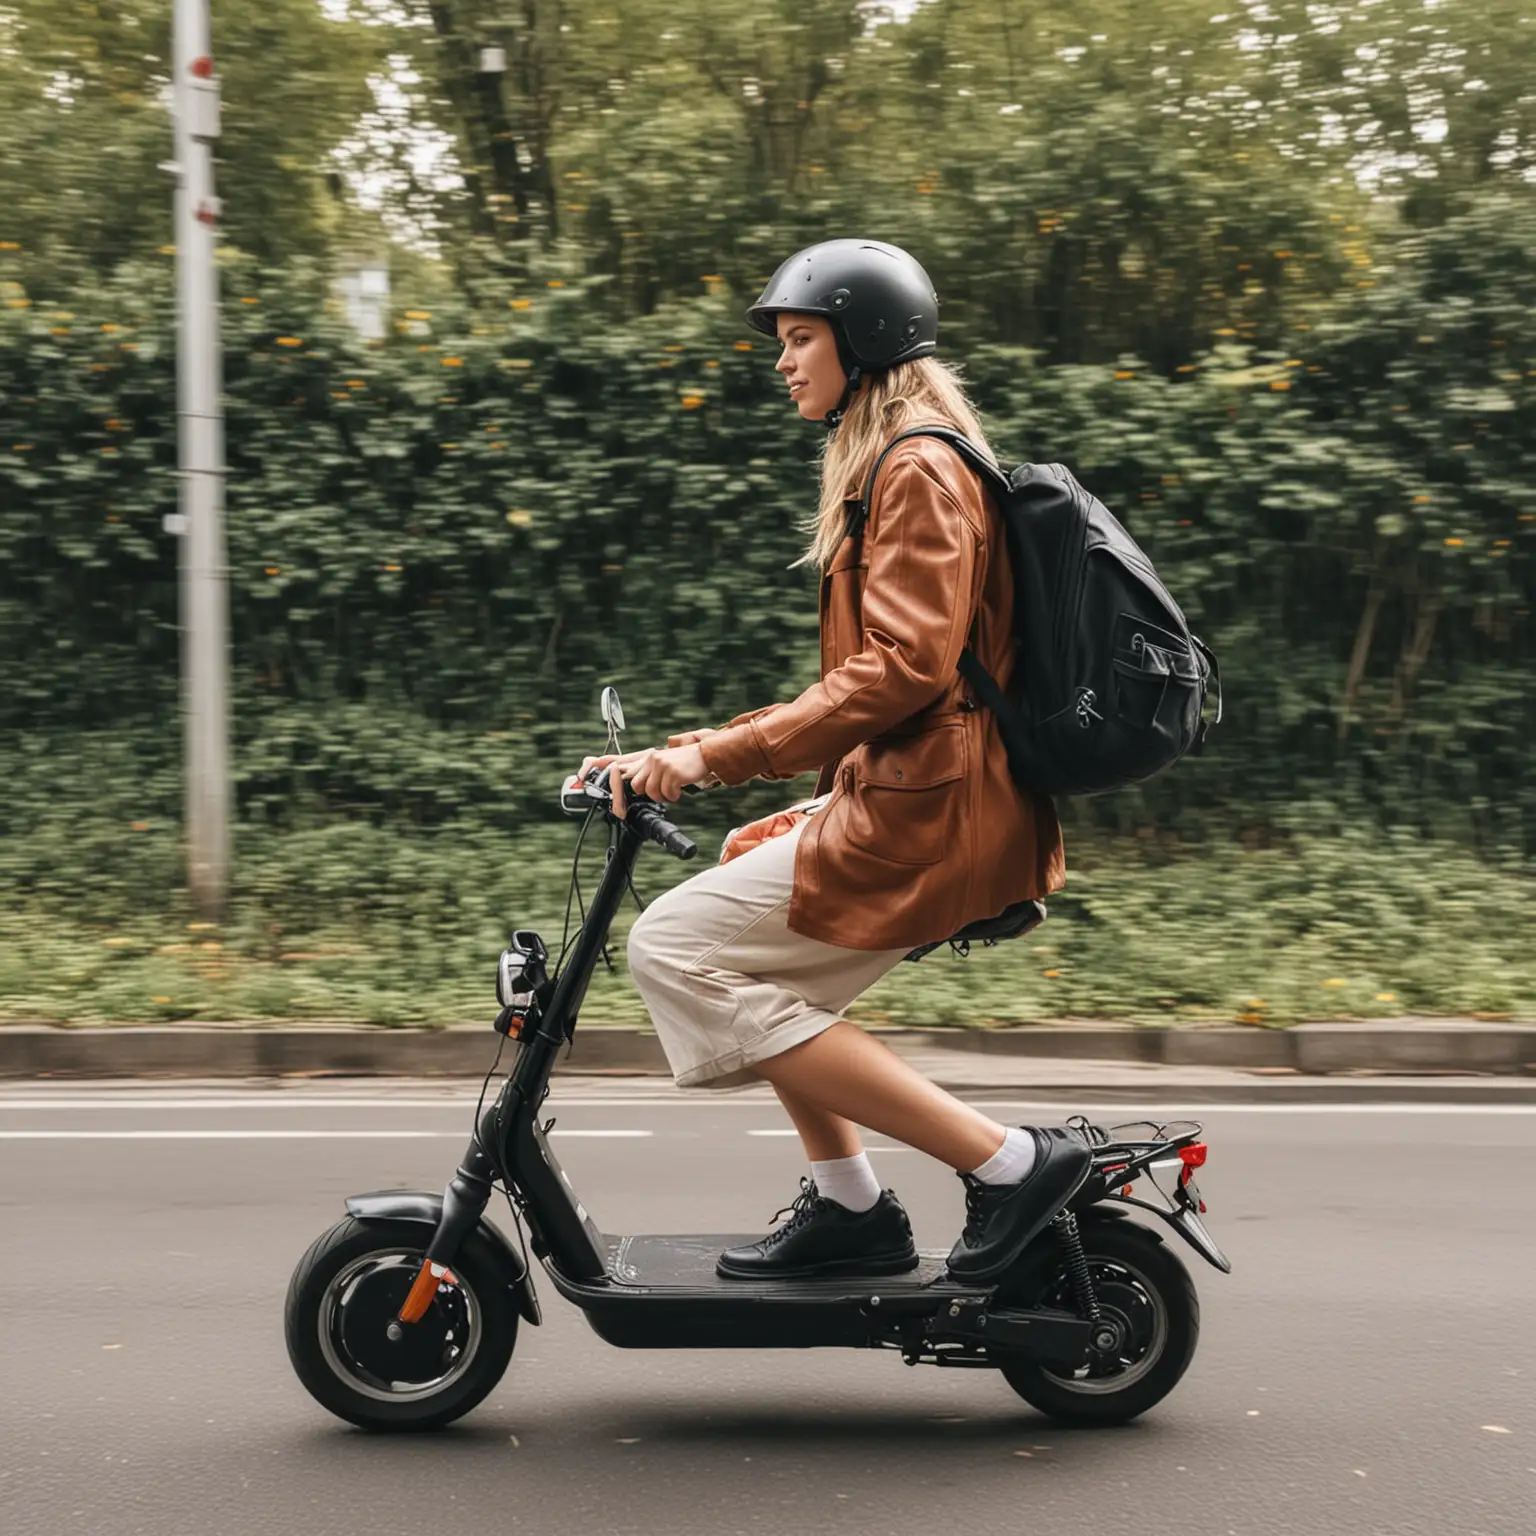 Commute on a scooter

